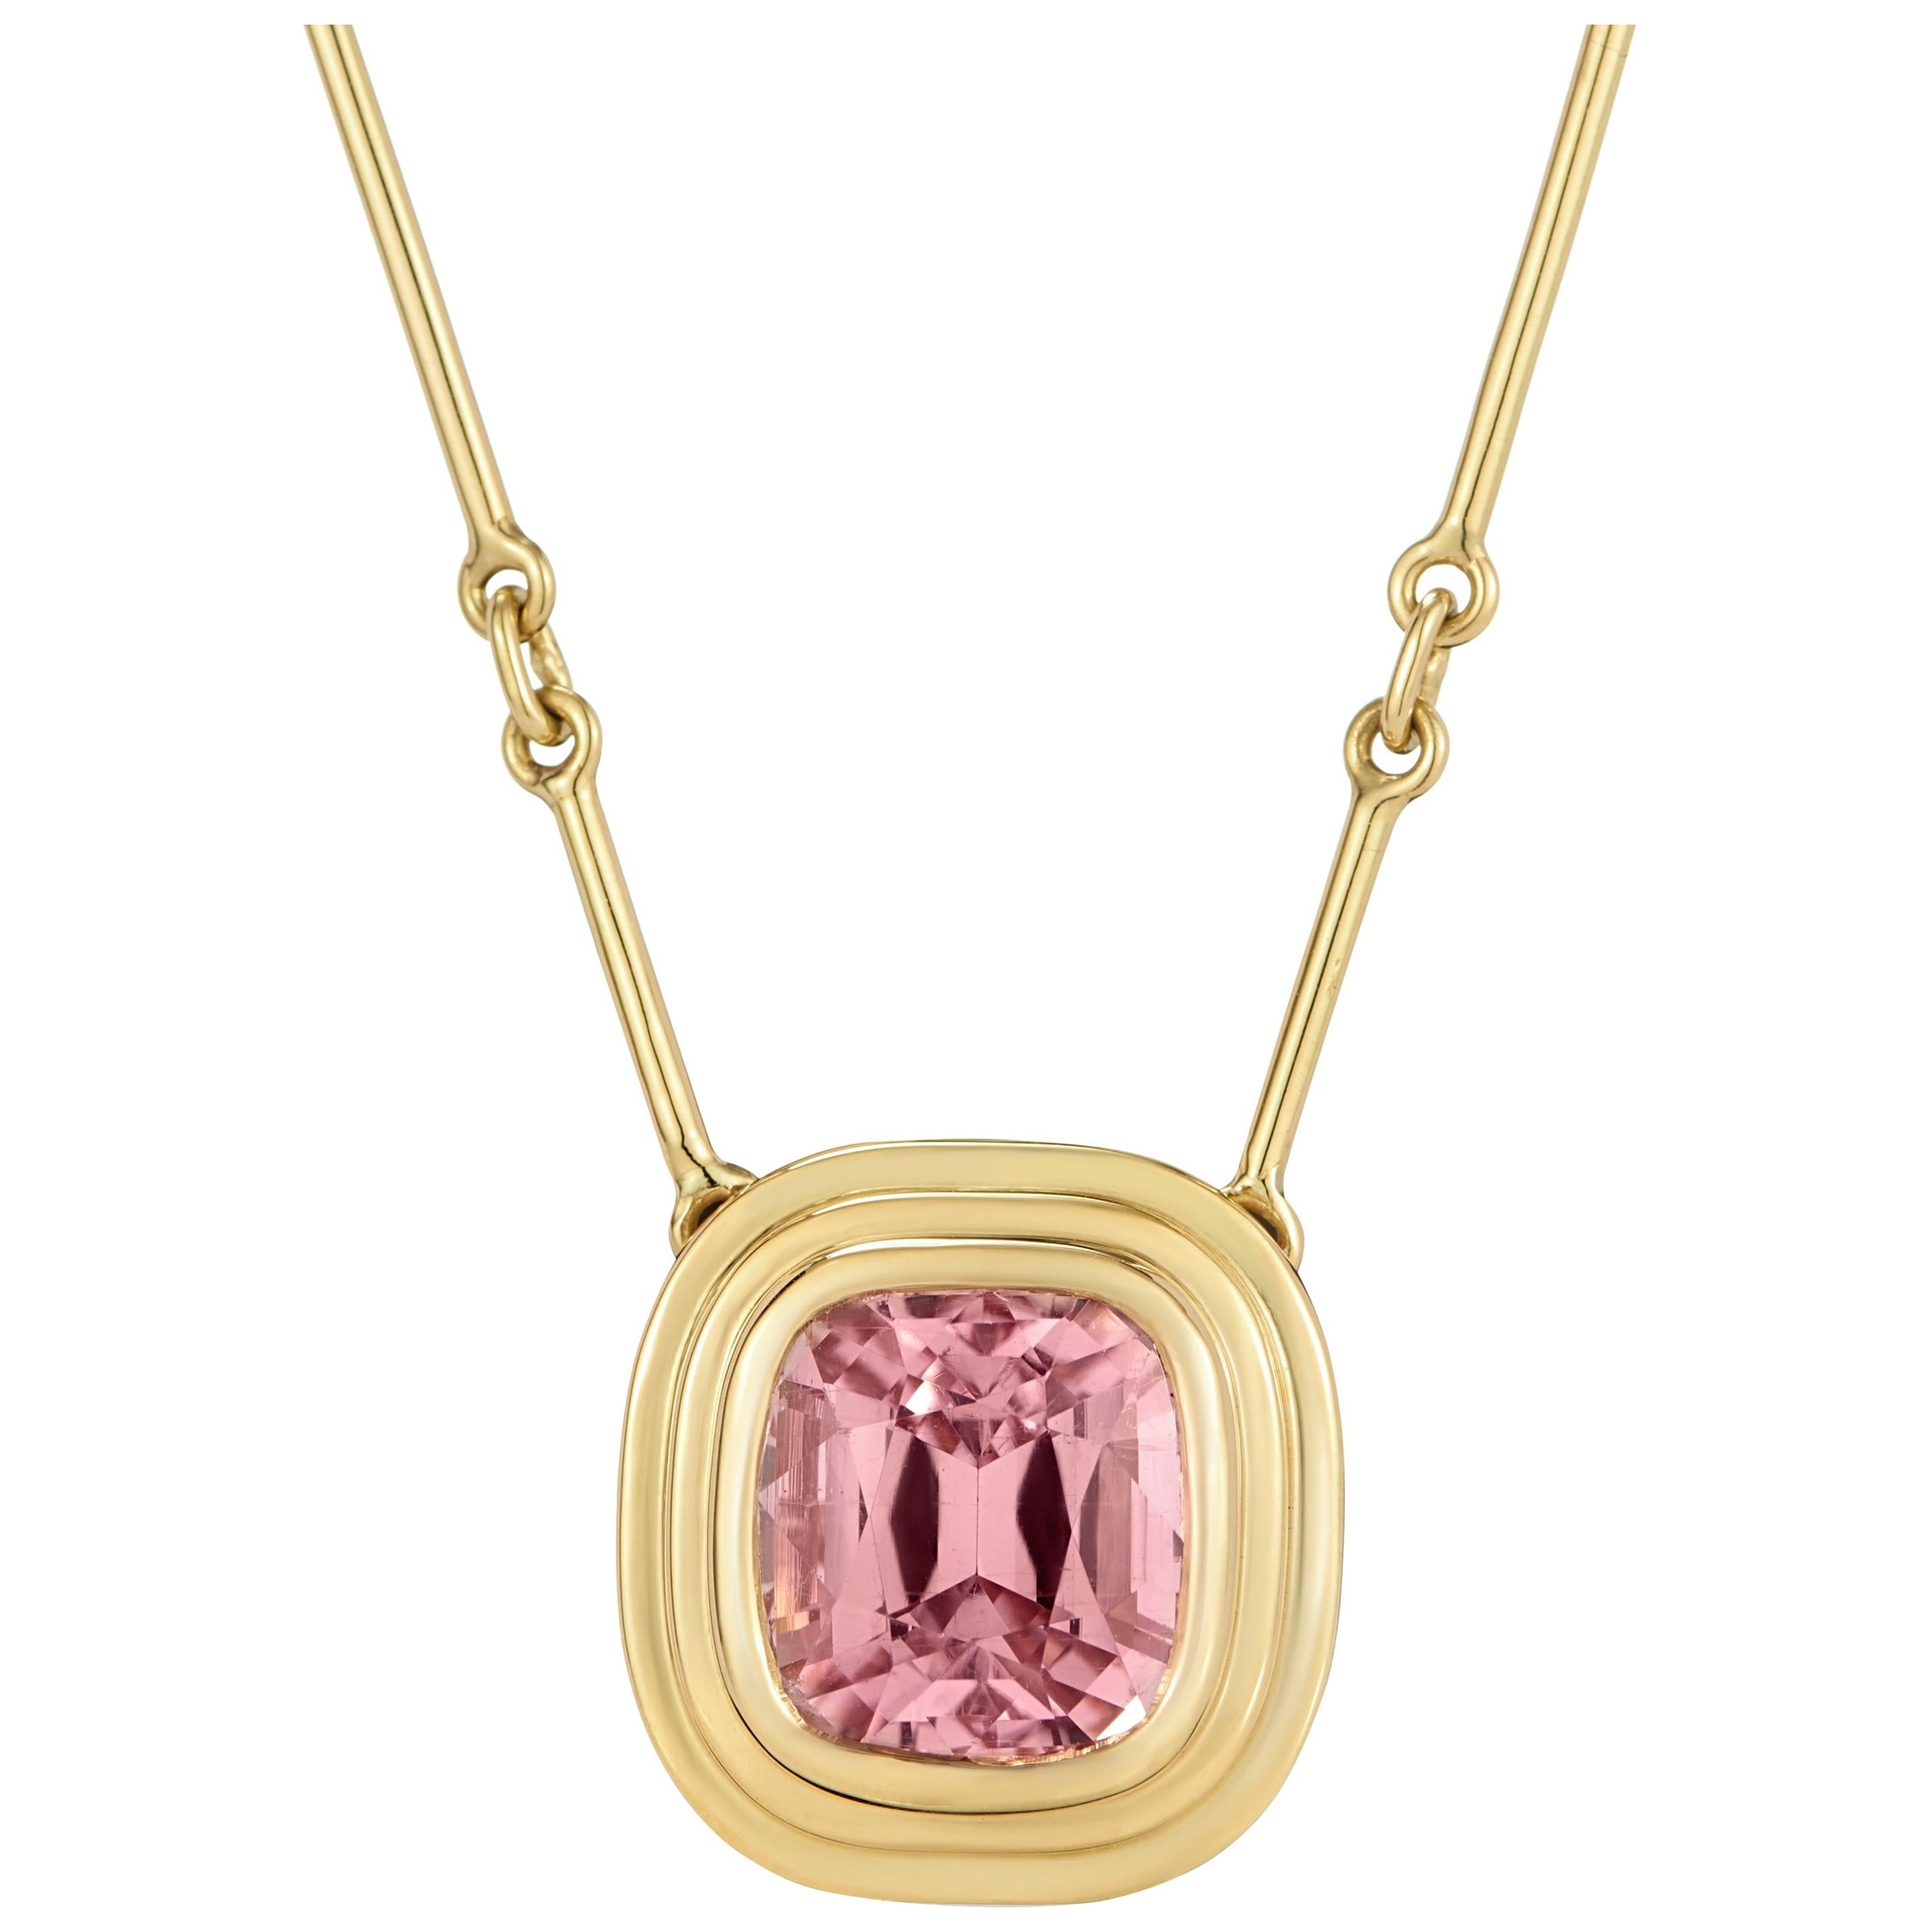 Athena: 1.24ct Cushion Cut Pink Tourmaline Necklace in 18k Yellow Gold For Sale